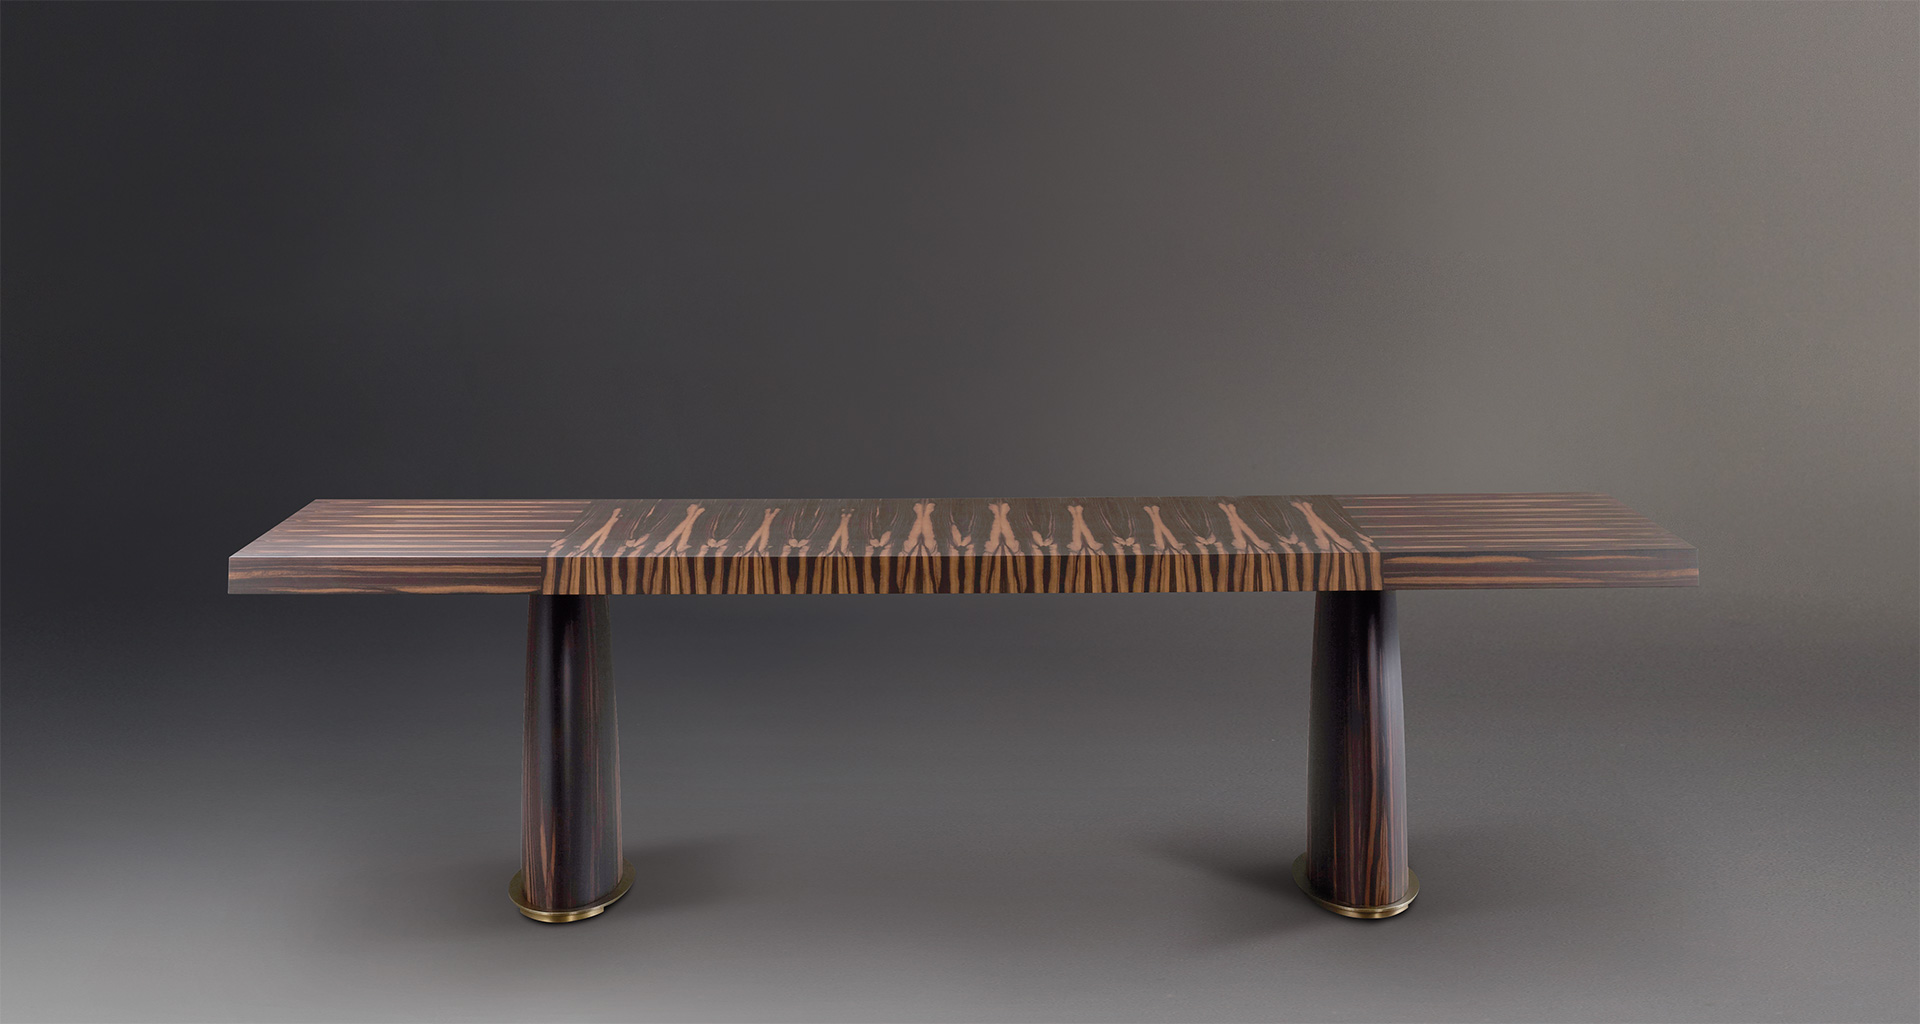 Goffredo is a wooden dining table with a bronze base and checked or striped top, from Promemoria's catalogue | Promemoria